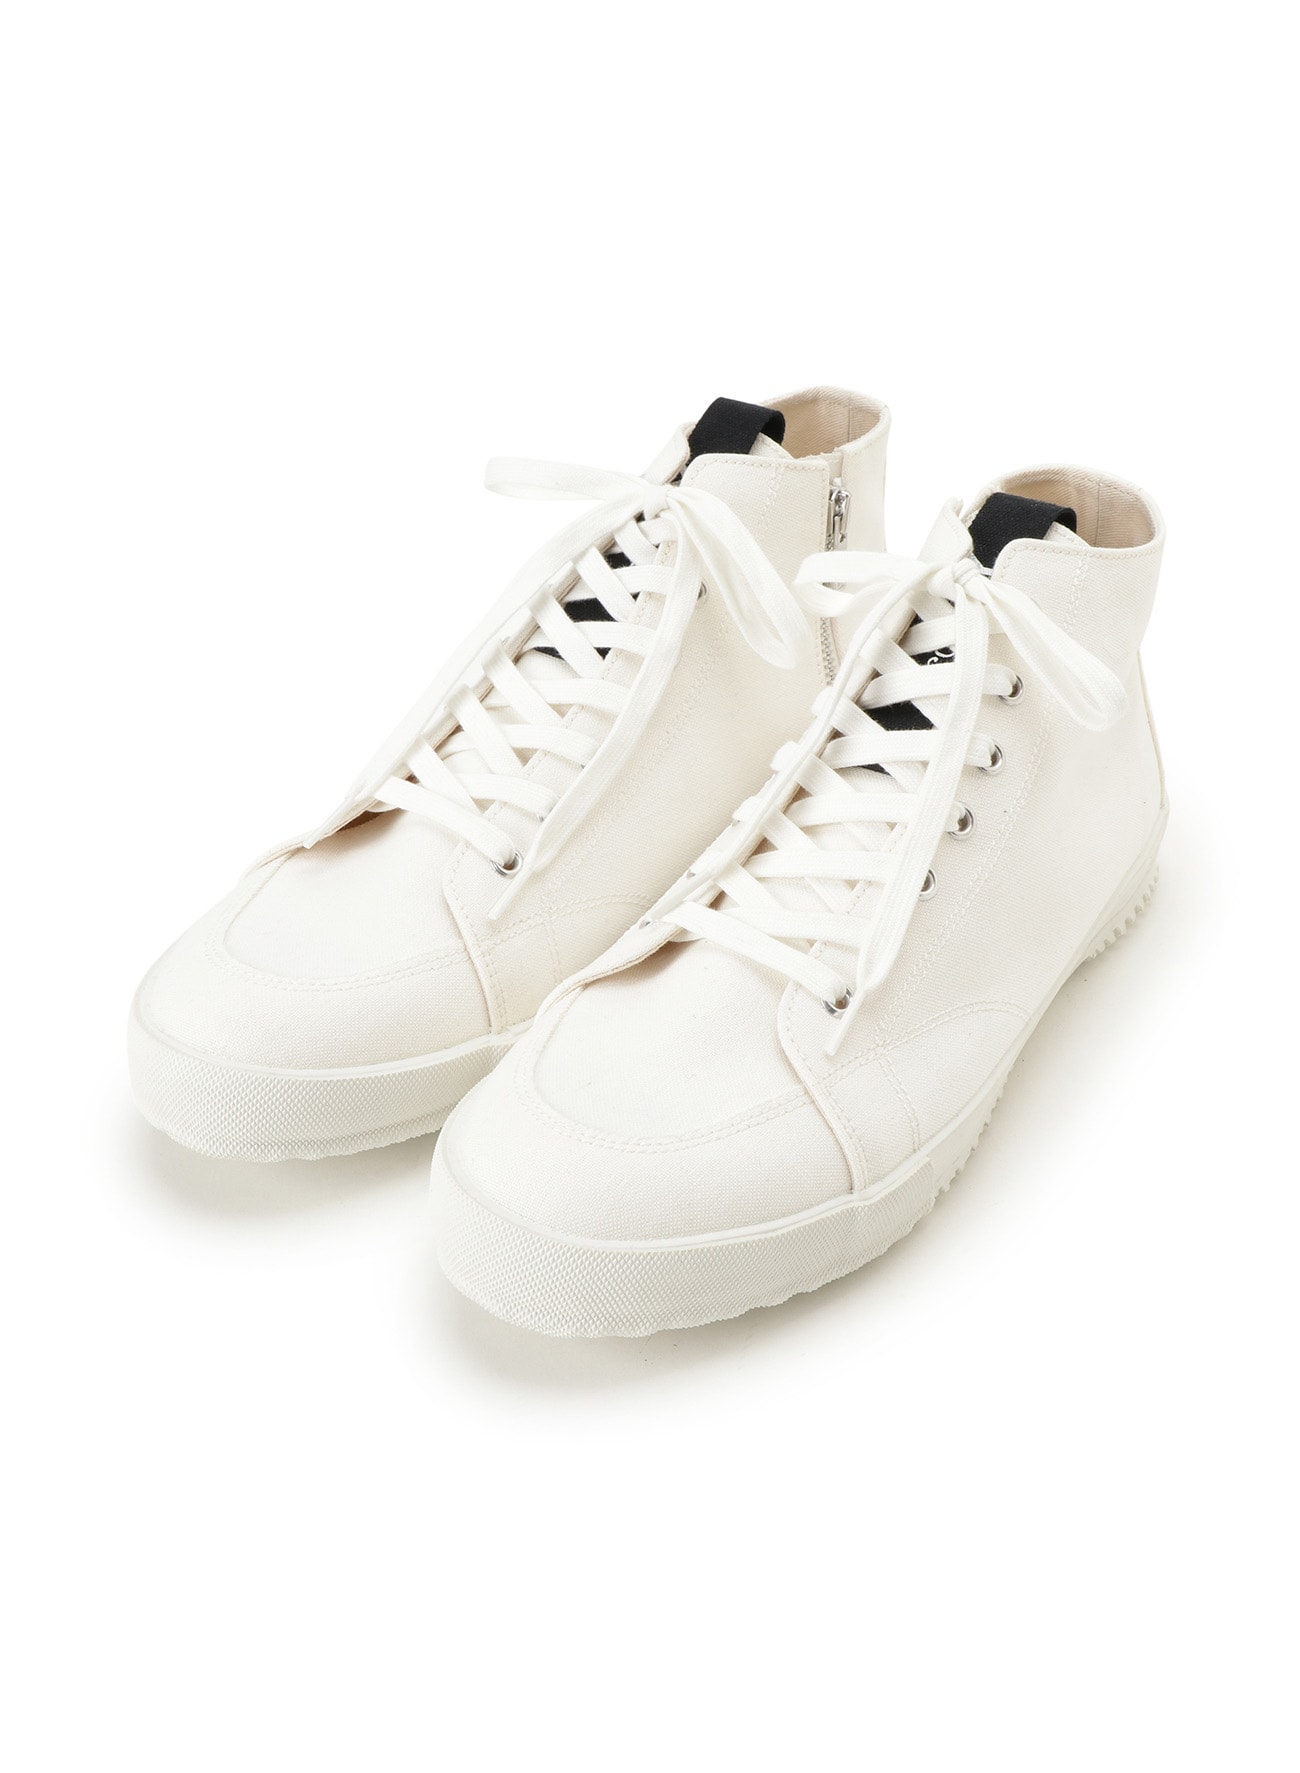 Cotton canvas Middle rise sneakers